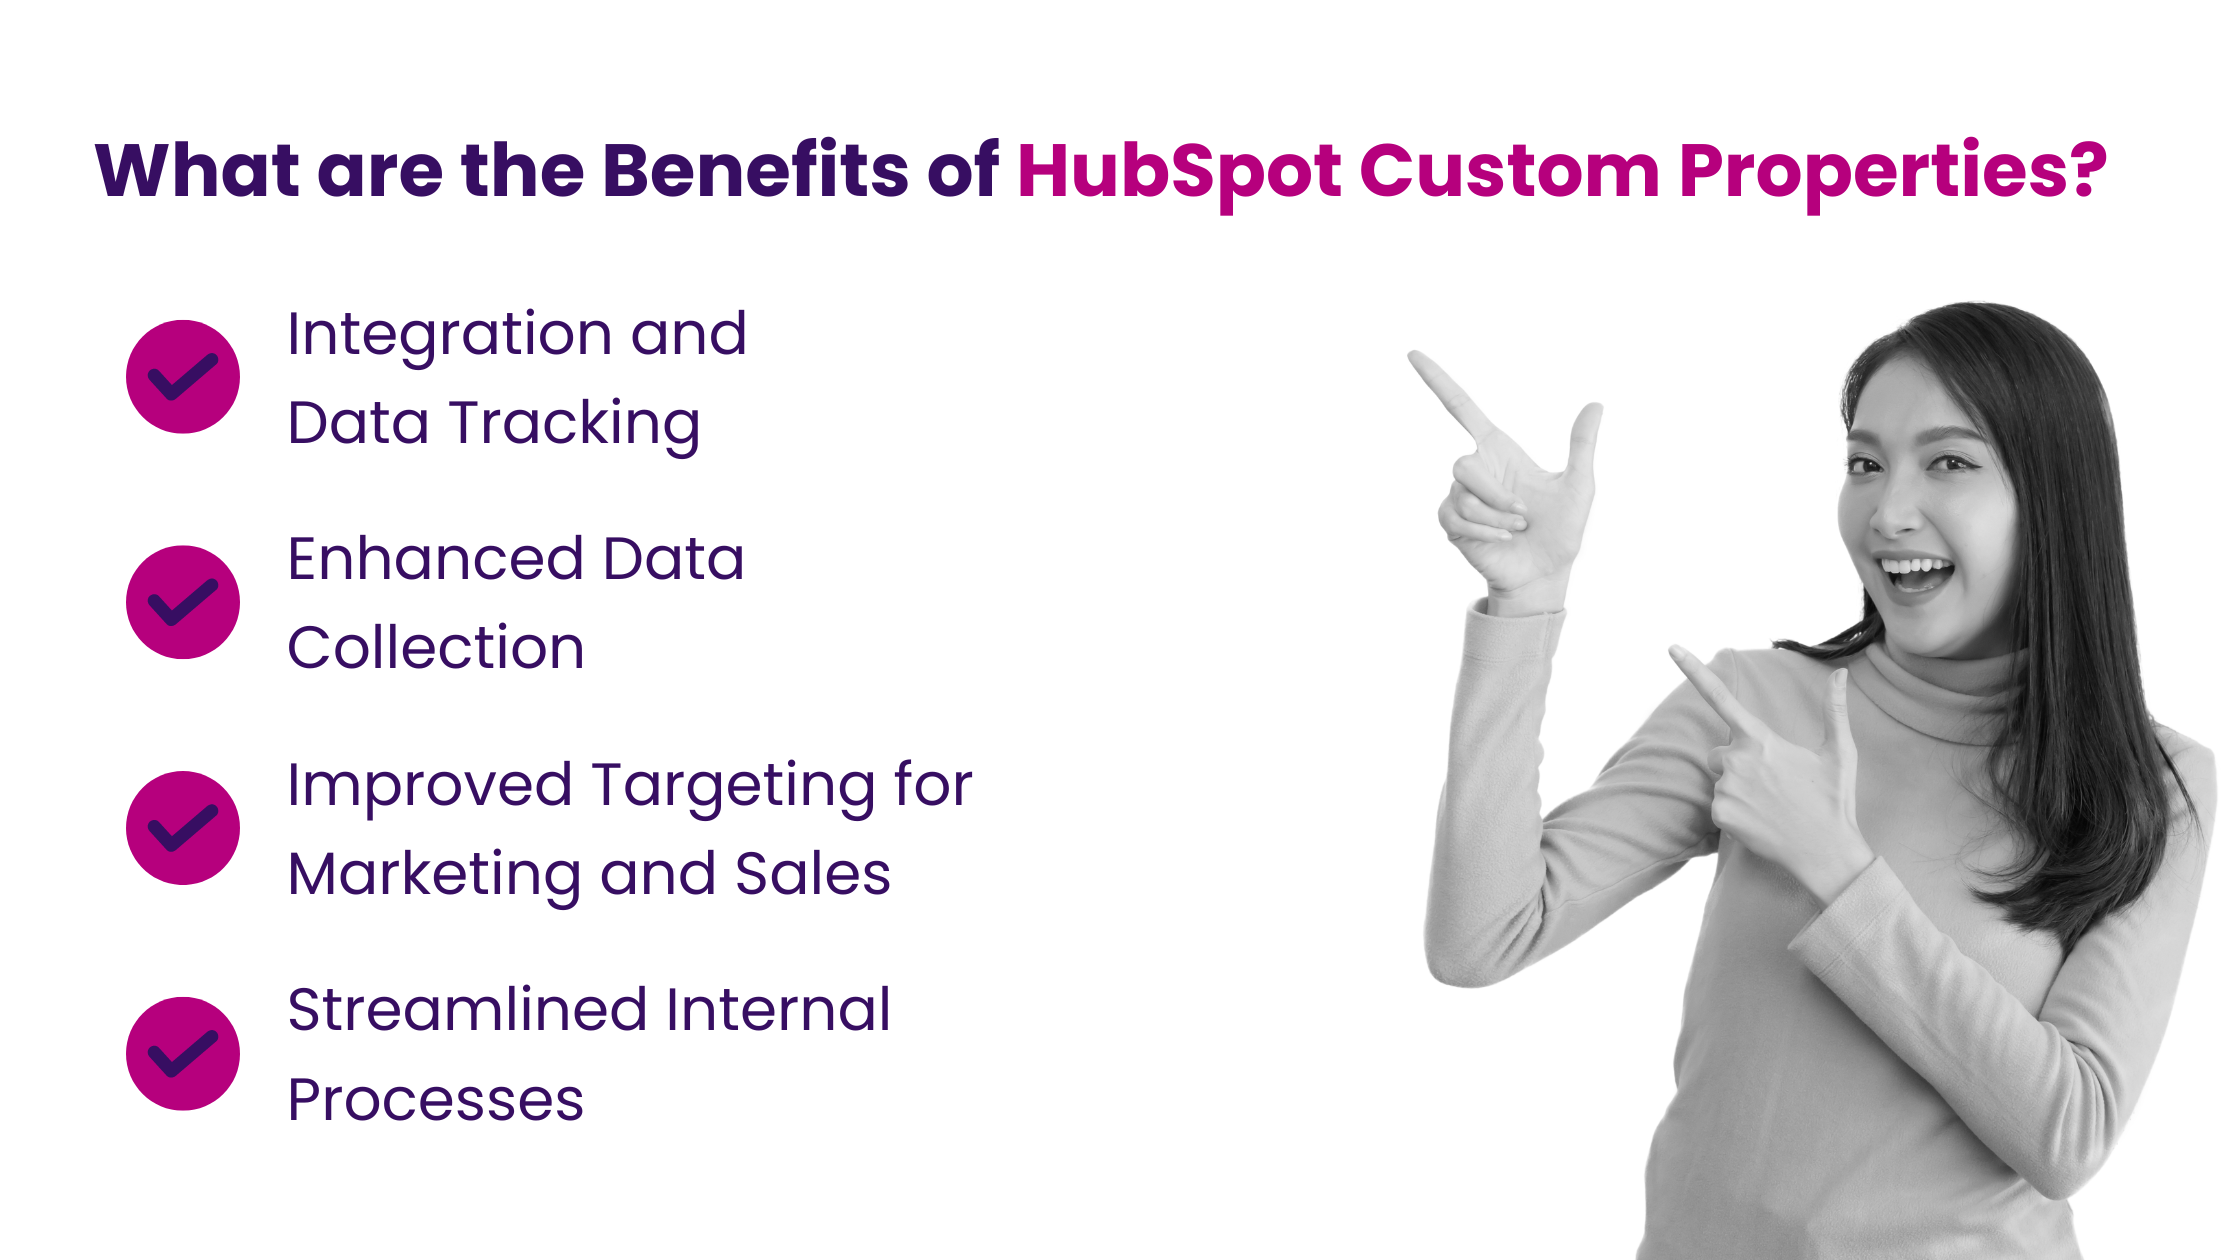 What are the Benefits of HubSpot Custom Properties